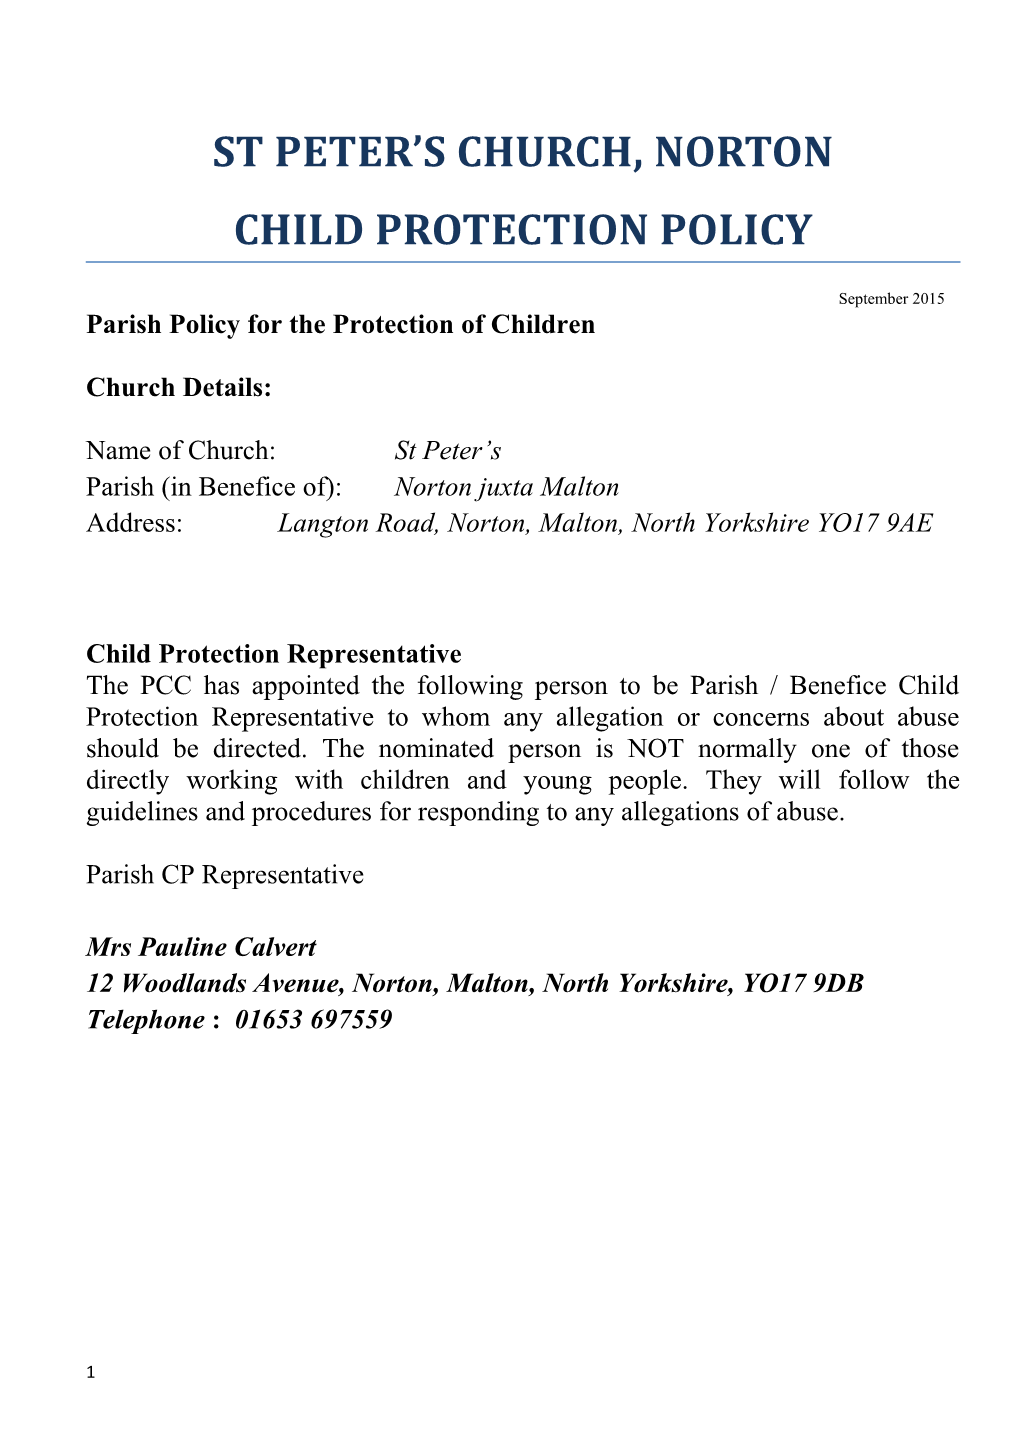 Parish Policy for the Protection of Children